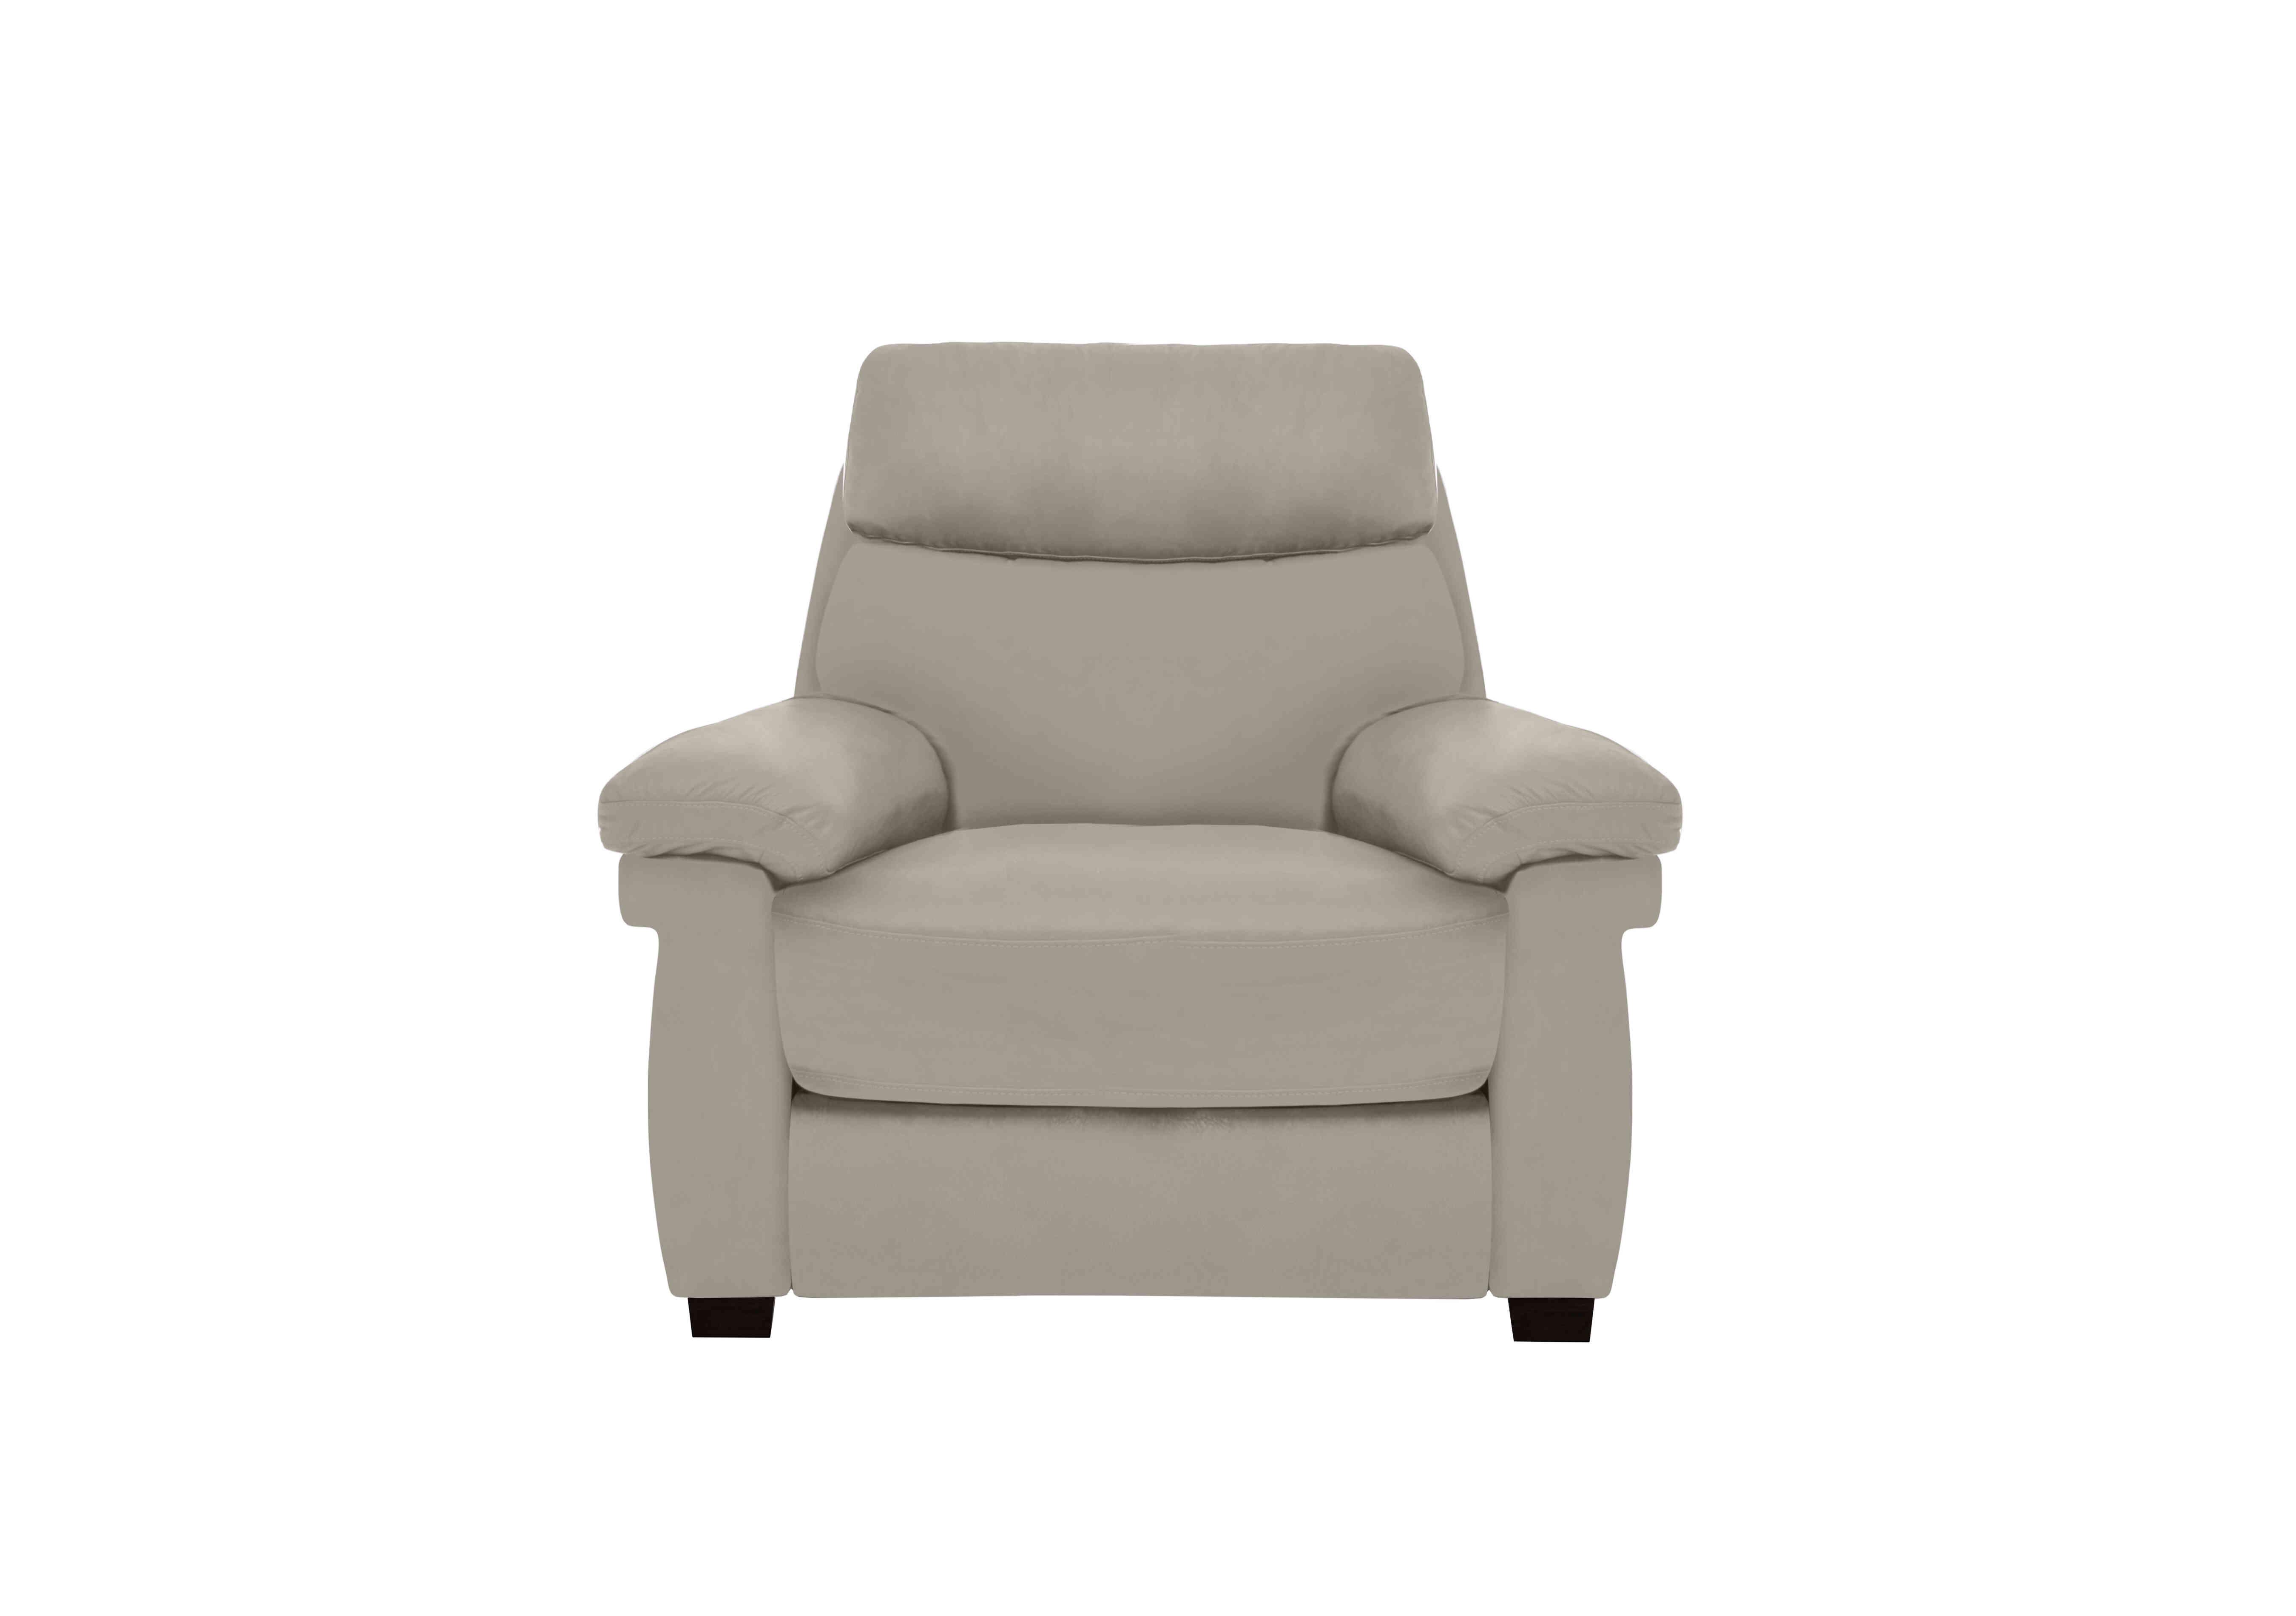 Serene Leather Chair in Bx-251e Grey on Furniture Village